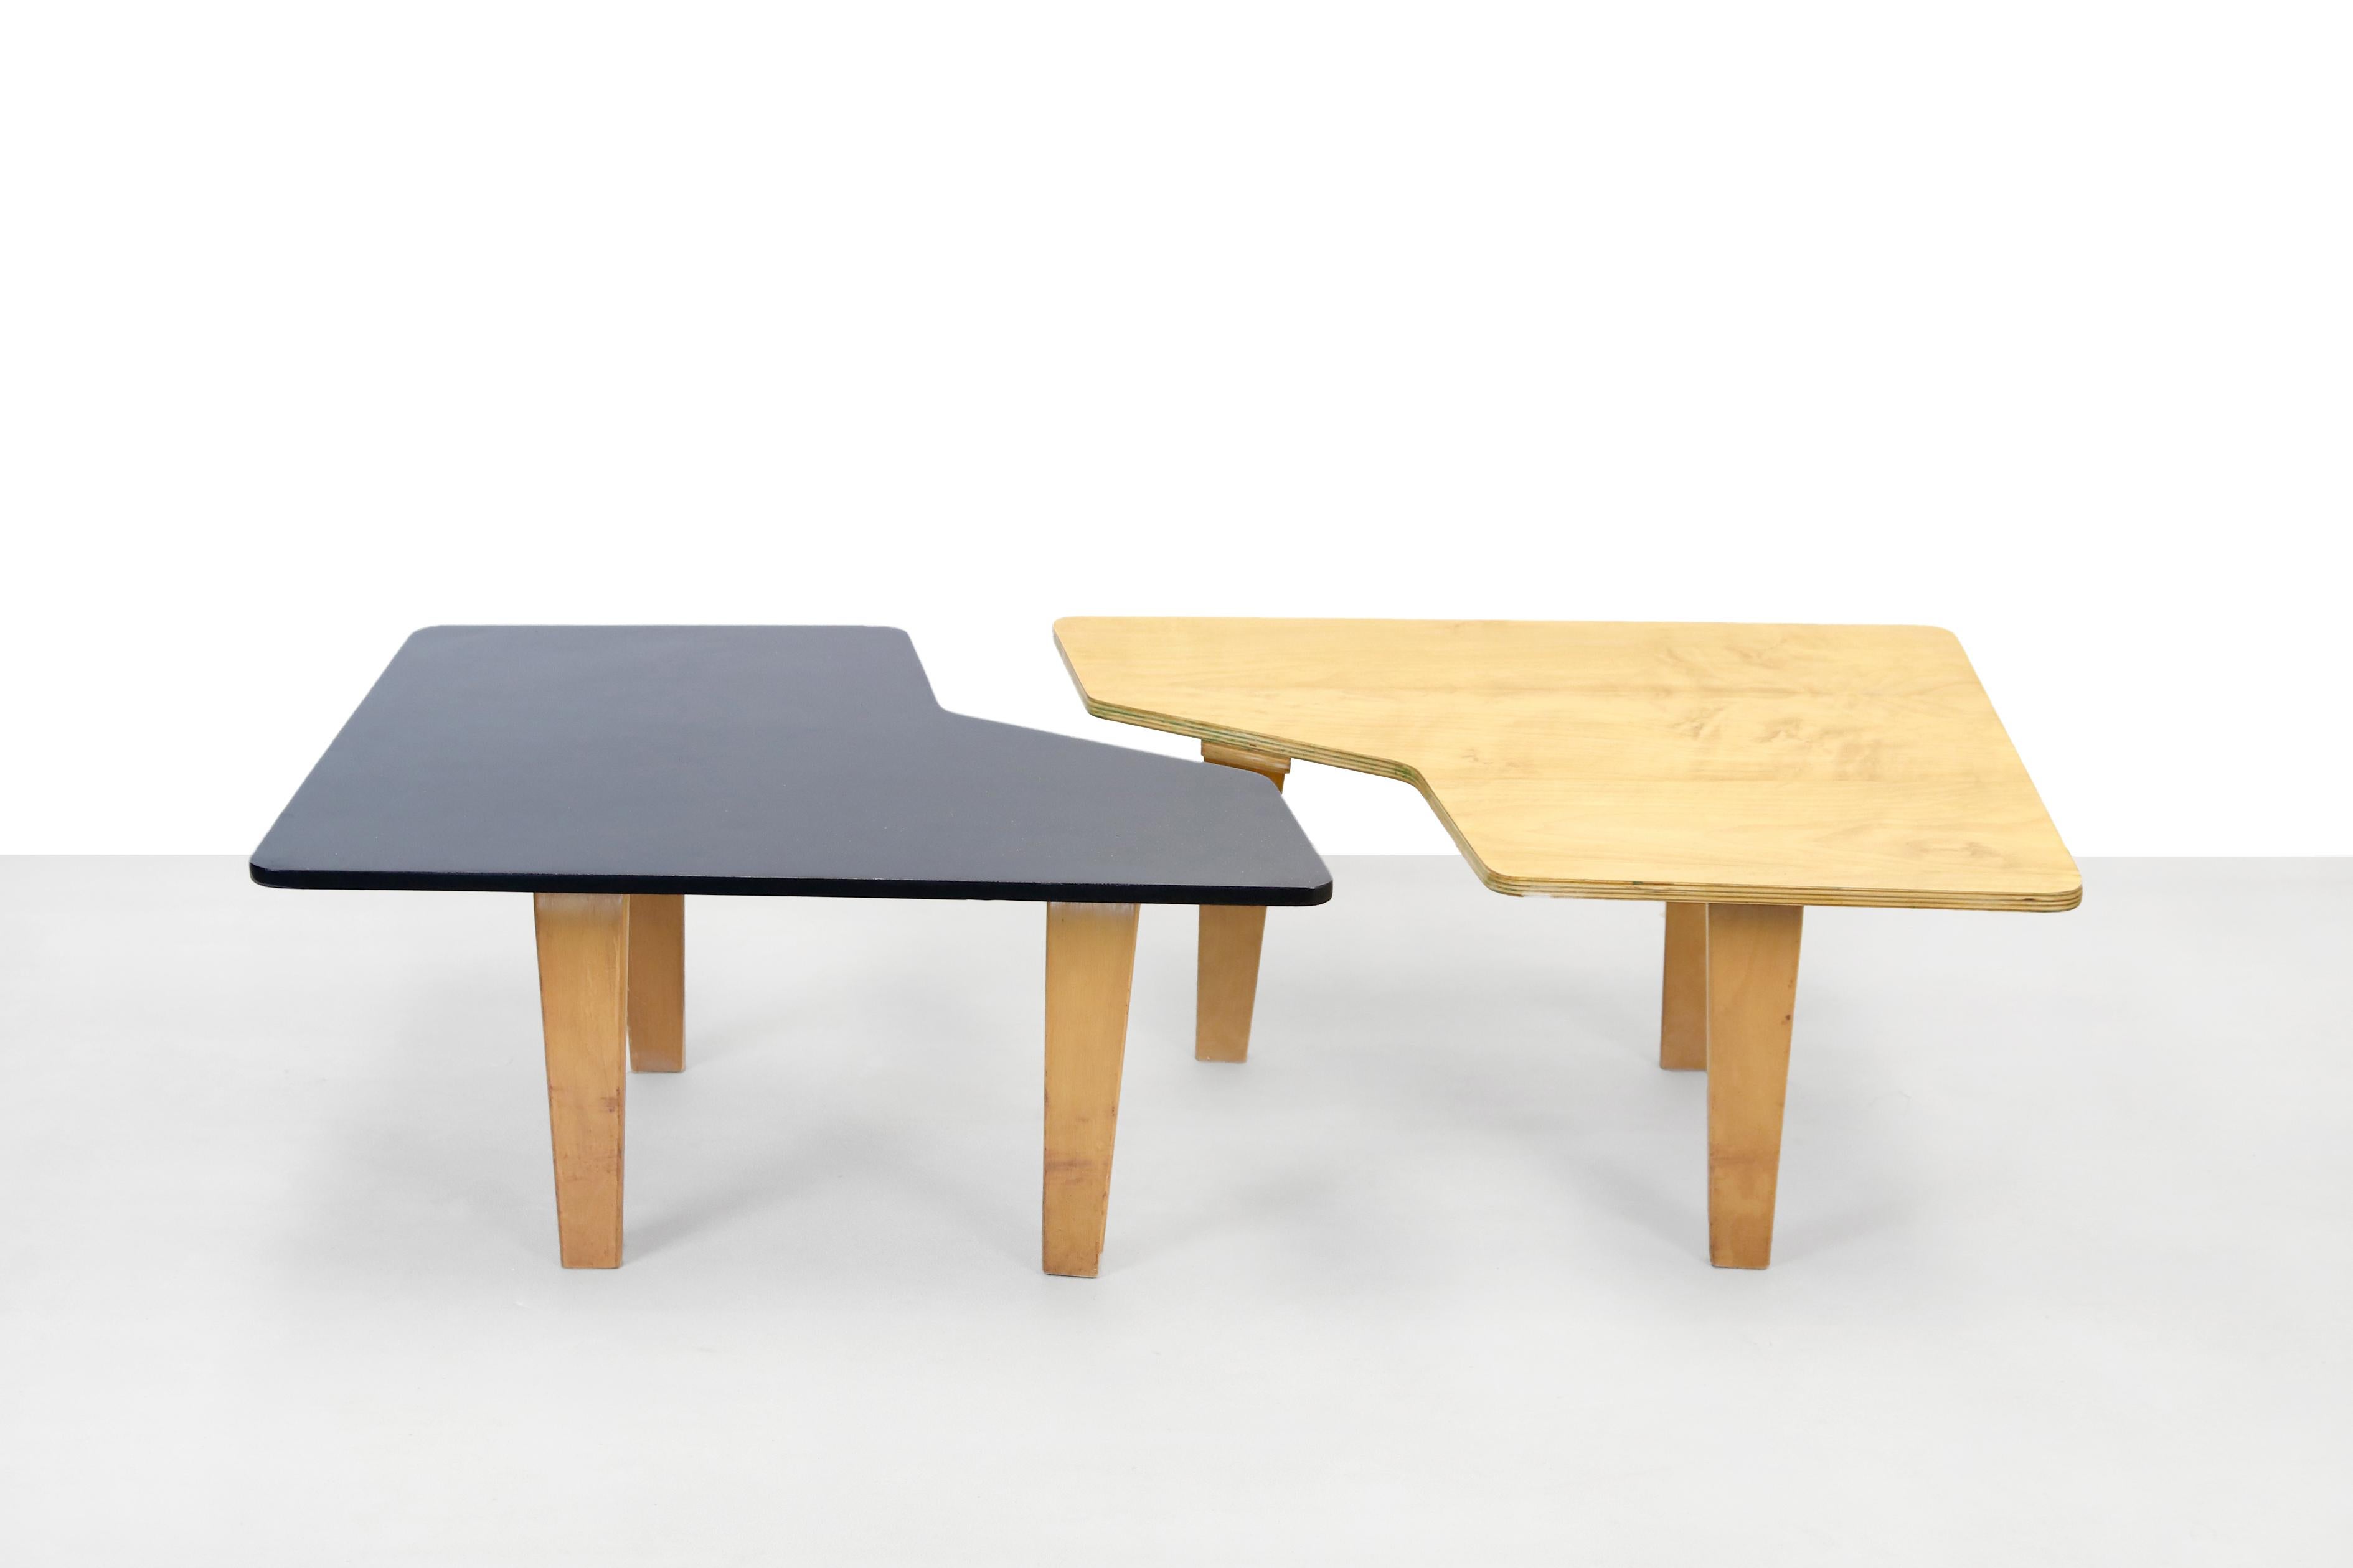 Beautiful set of two puzzle-shaped tables that together form an elongated coffee table. These tables are designed by Cees Braakman and produced by Pastoe in the 1950s in Utrecht, the Netherlands. They are part of the Combex series which was one of